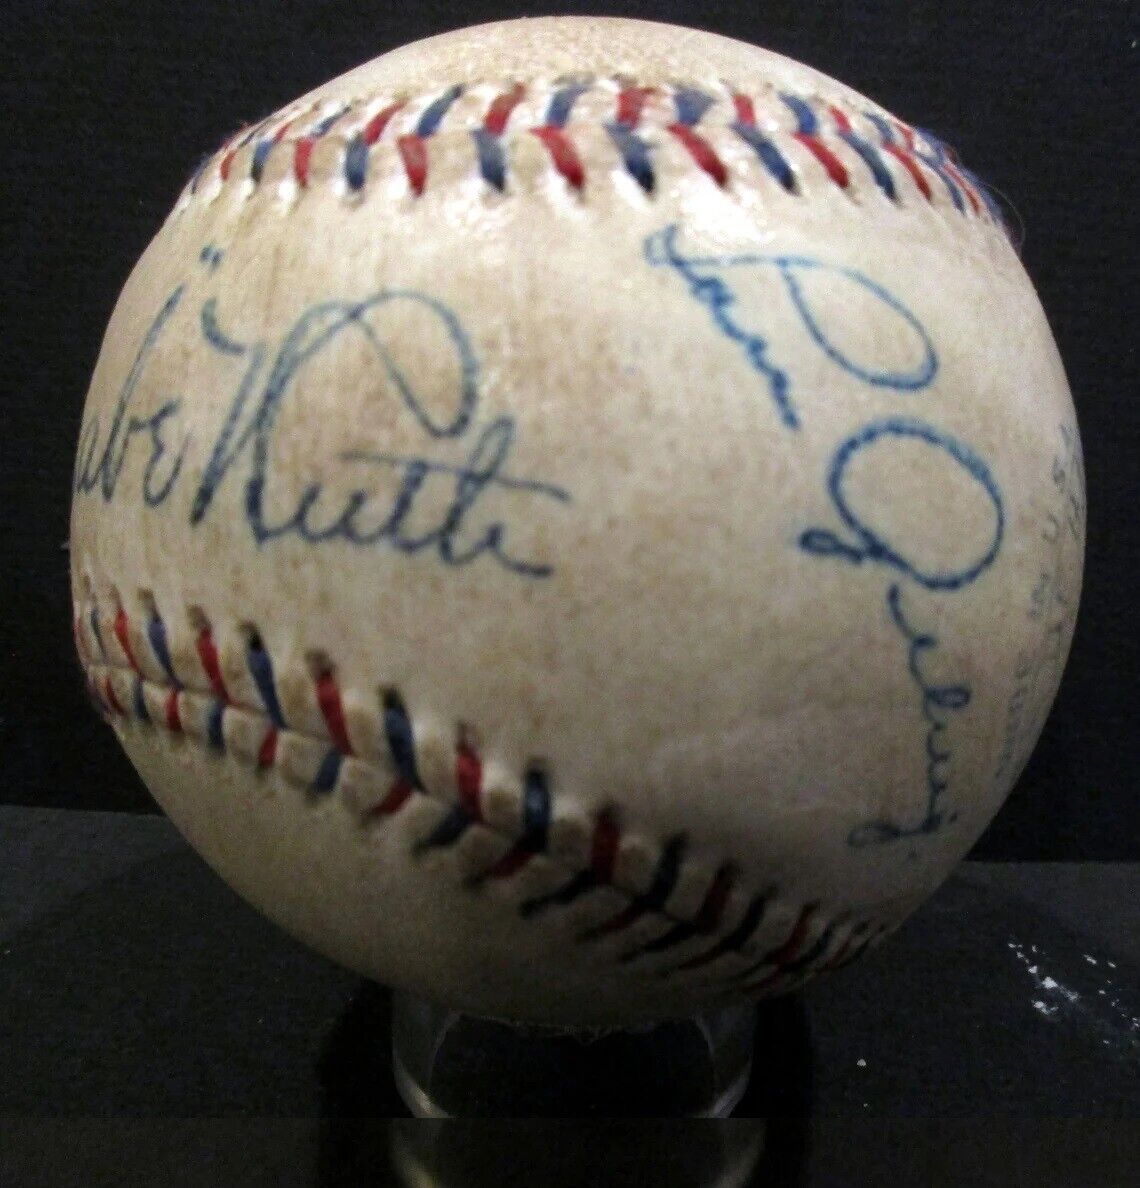 Babe Ruth and Lou Gehrig - Autographed Baseball - Beautiful High Quality Replica